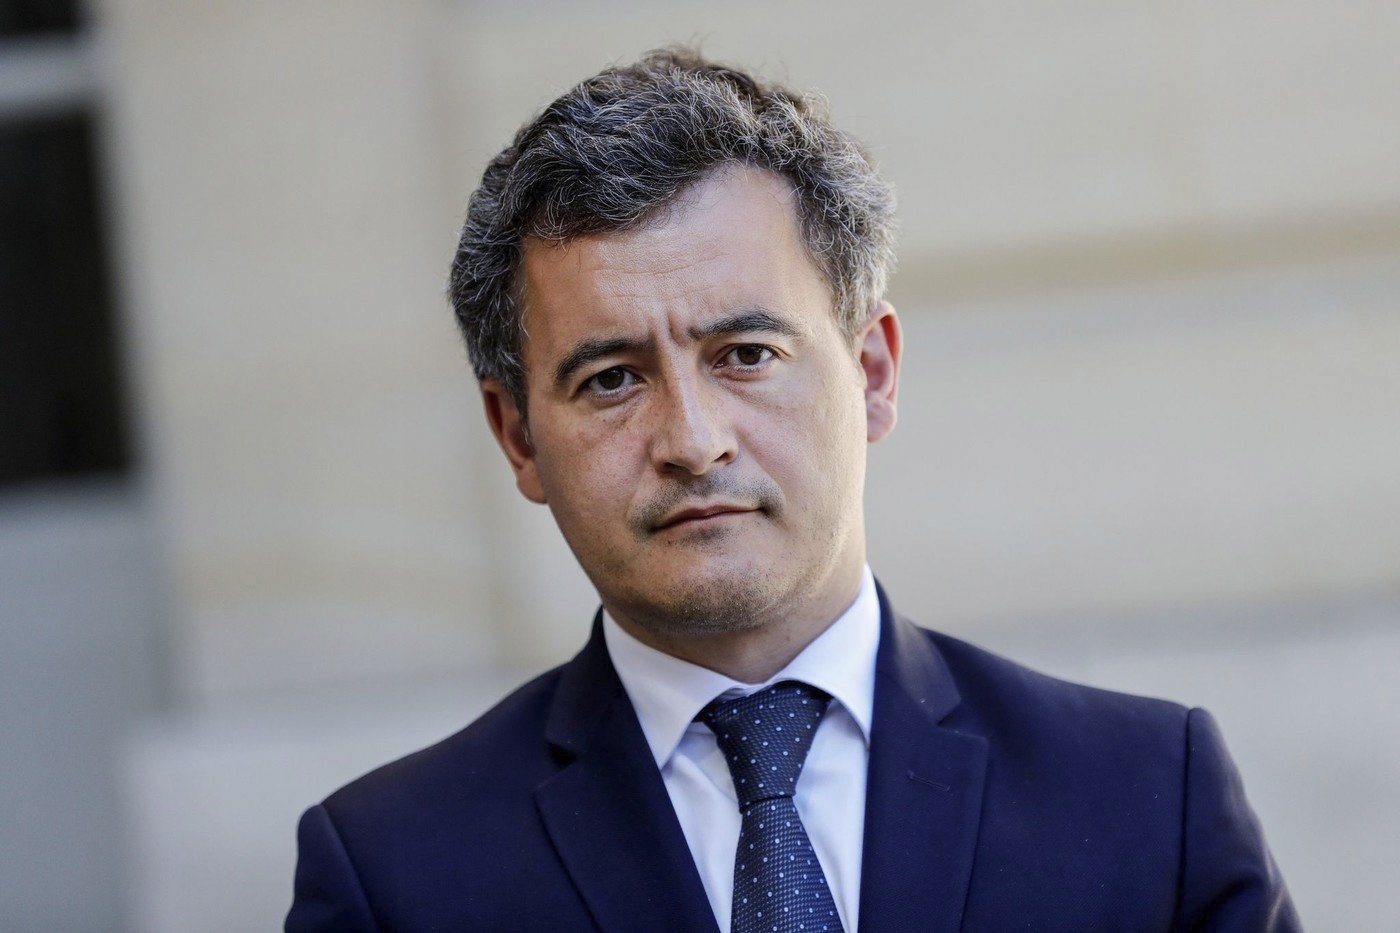 French Interior Minister Gerald Darmanin looks on as the prime minister speaks to the press after a videoconference meeting on emergency measures regarding local authorities' finances at the Hotel Matignon, in Paris, France, May 29, 2020. (AFP Photo)